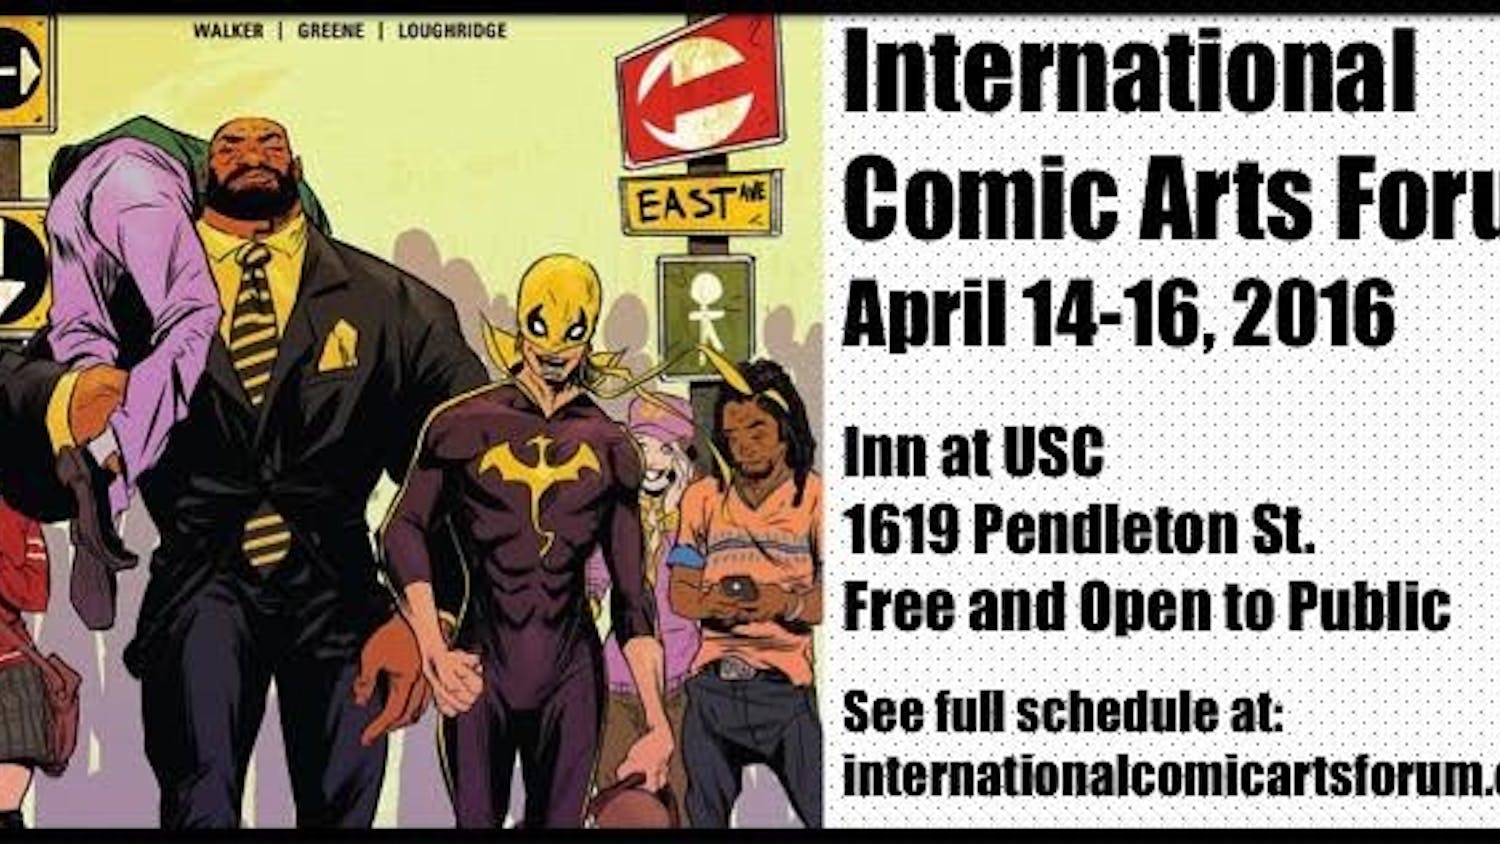 The International Comic Arts Forum strives to educate the public about the art of comics and promote this medium.